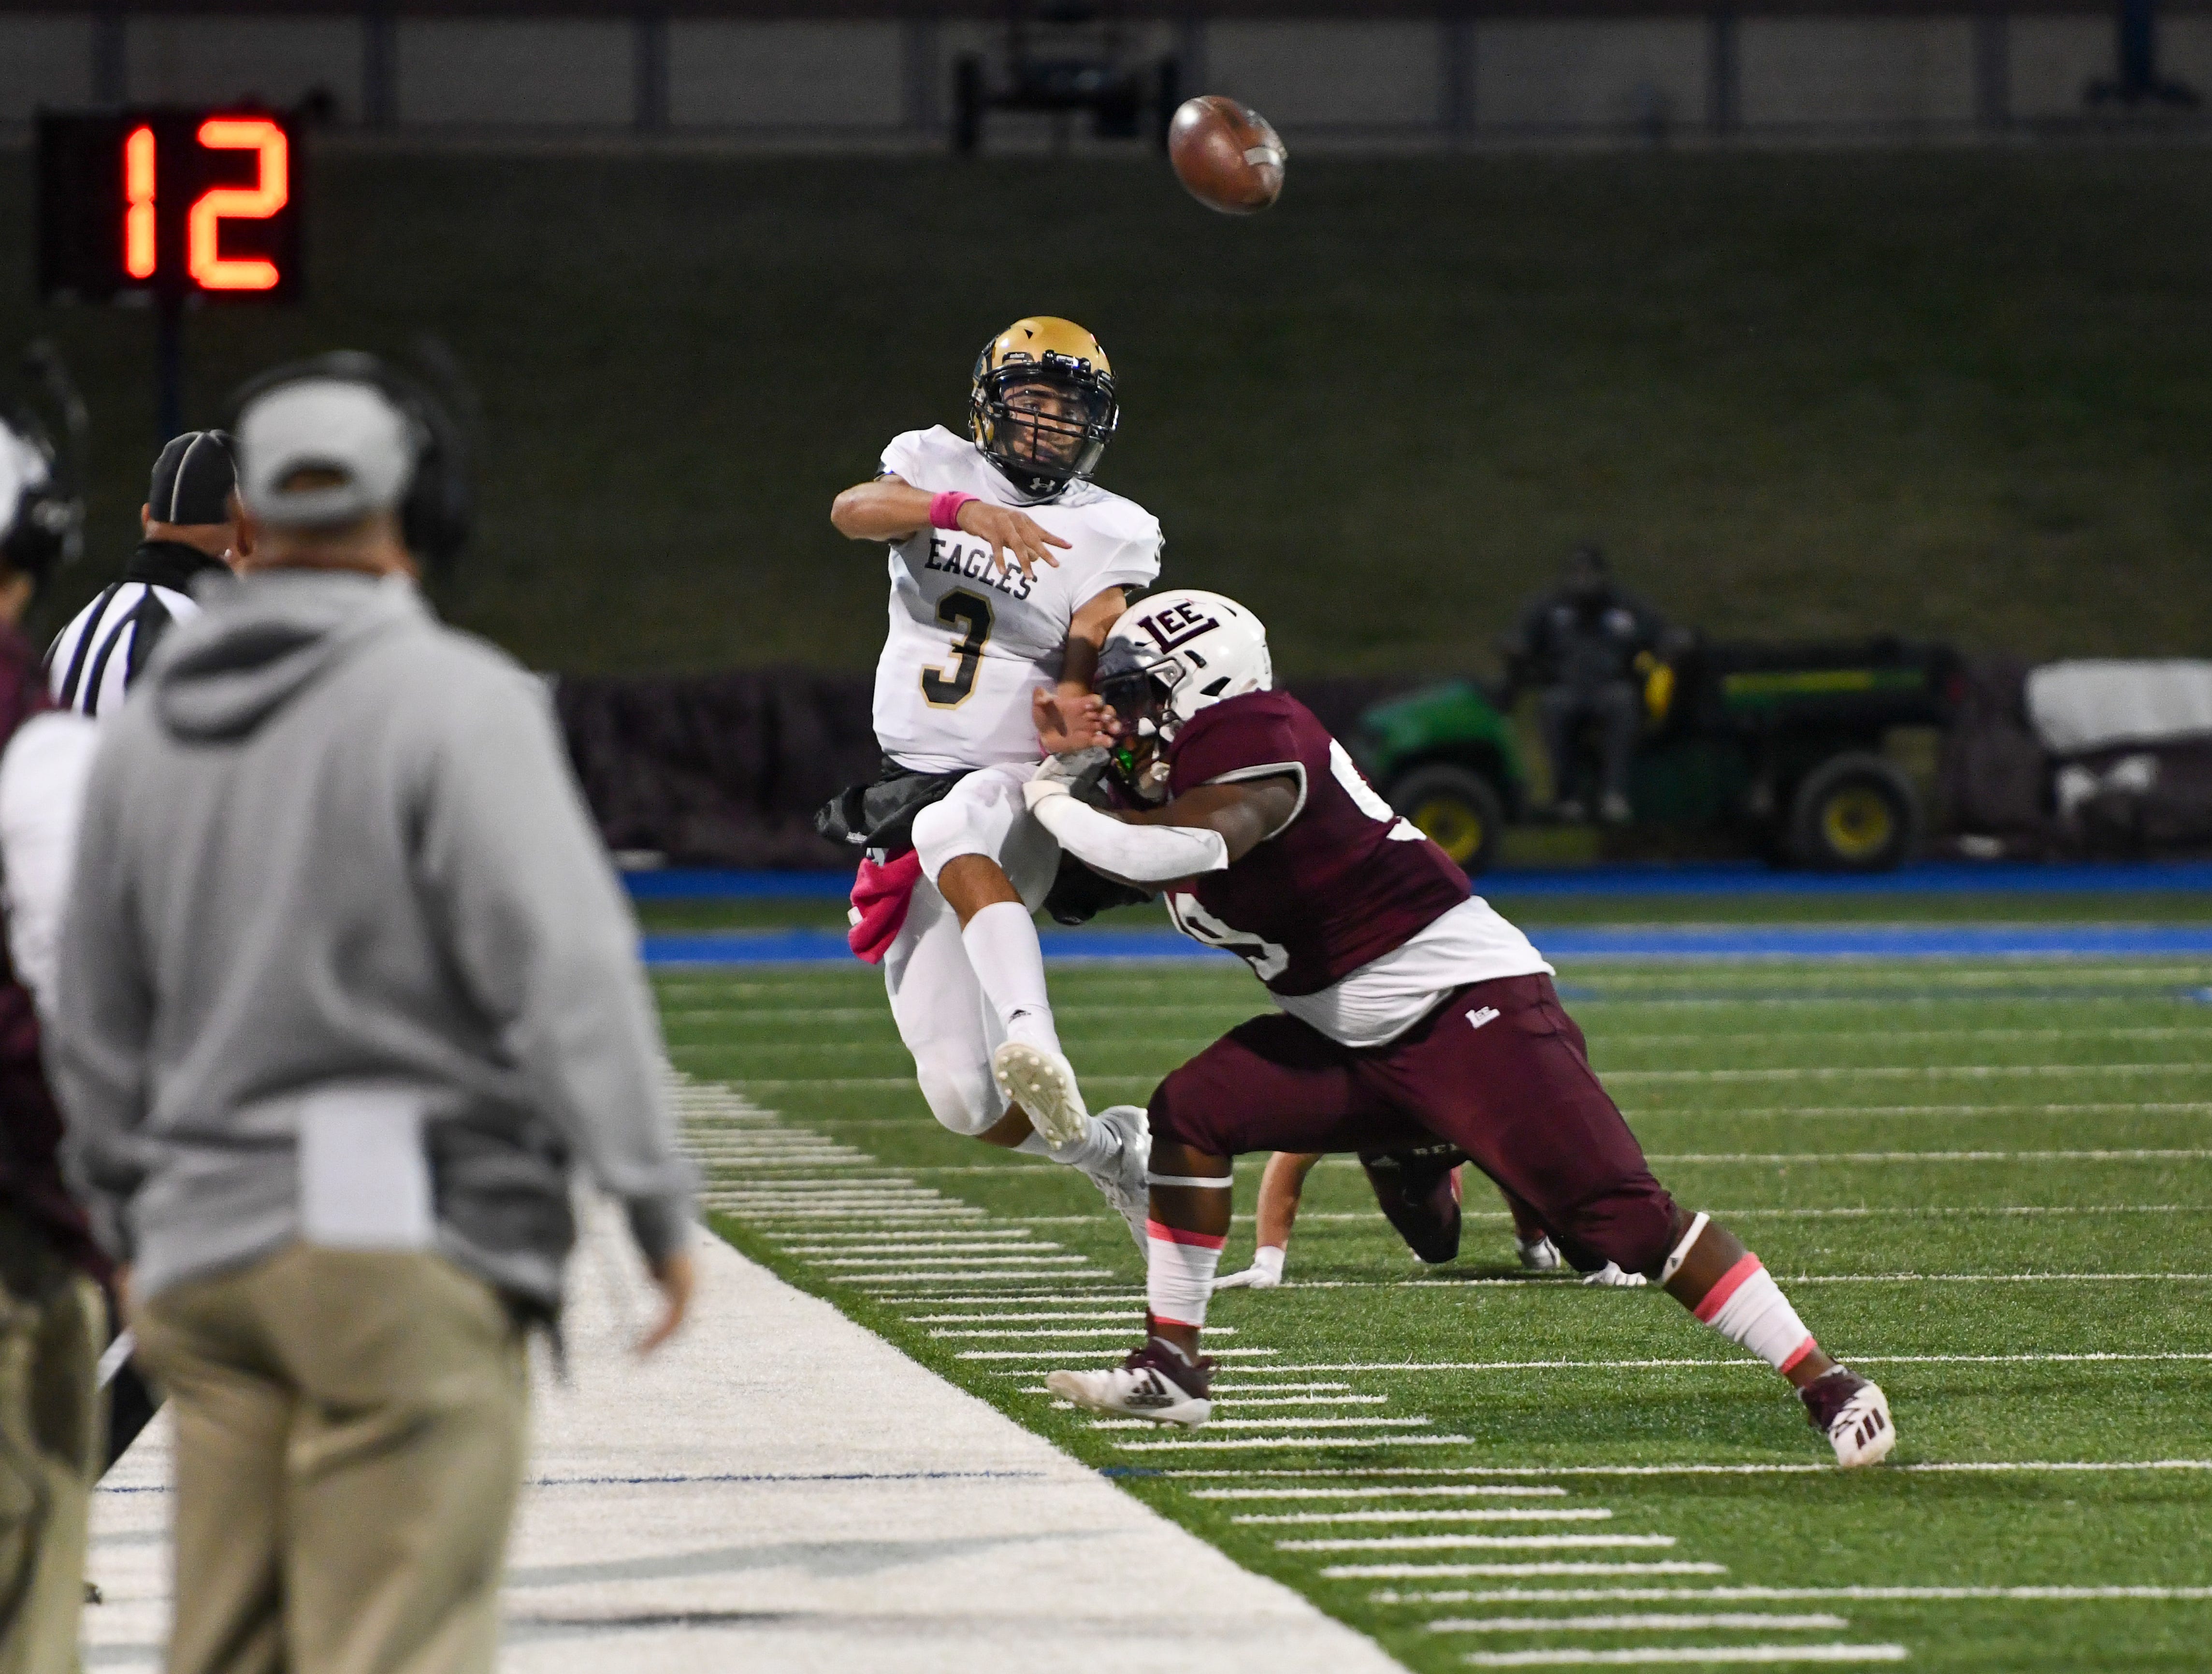 Midland Lee rolls past Abilene High in District 2-6A football play